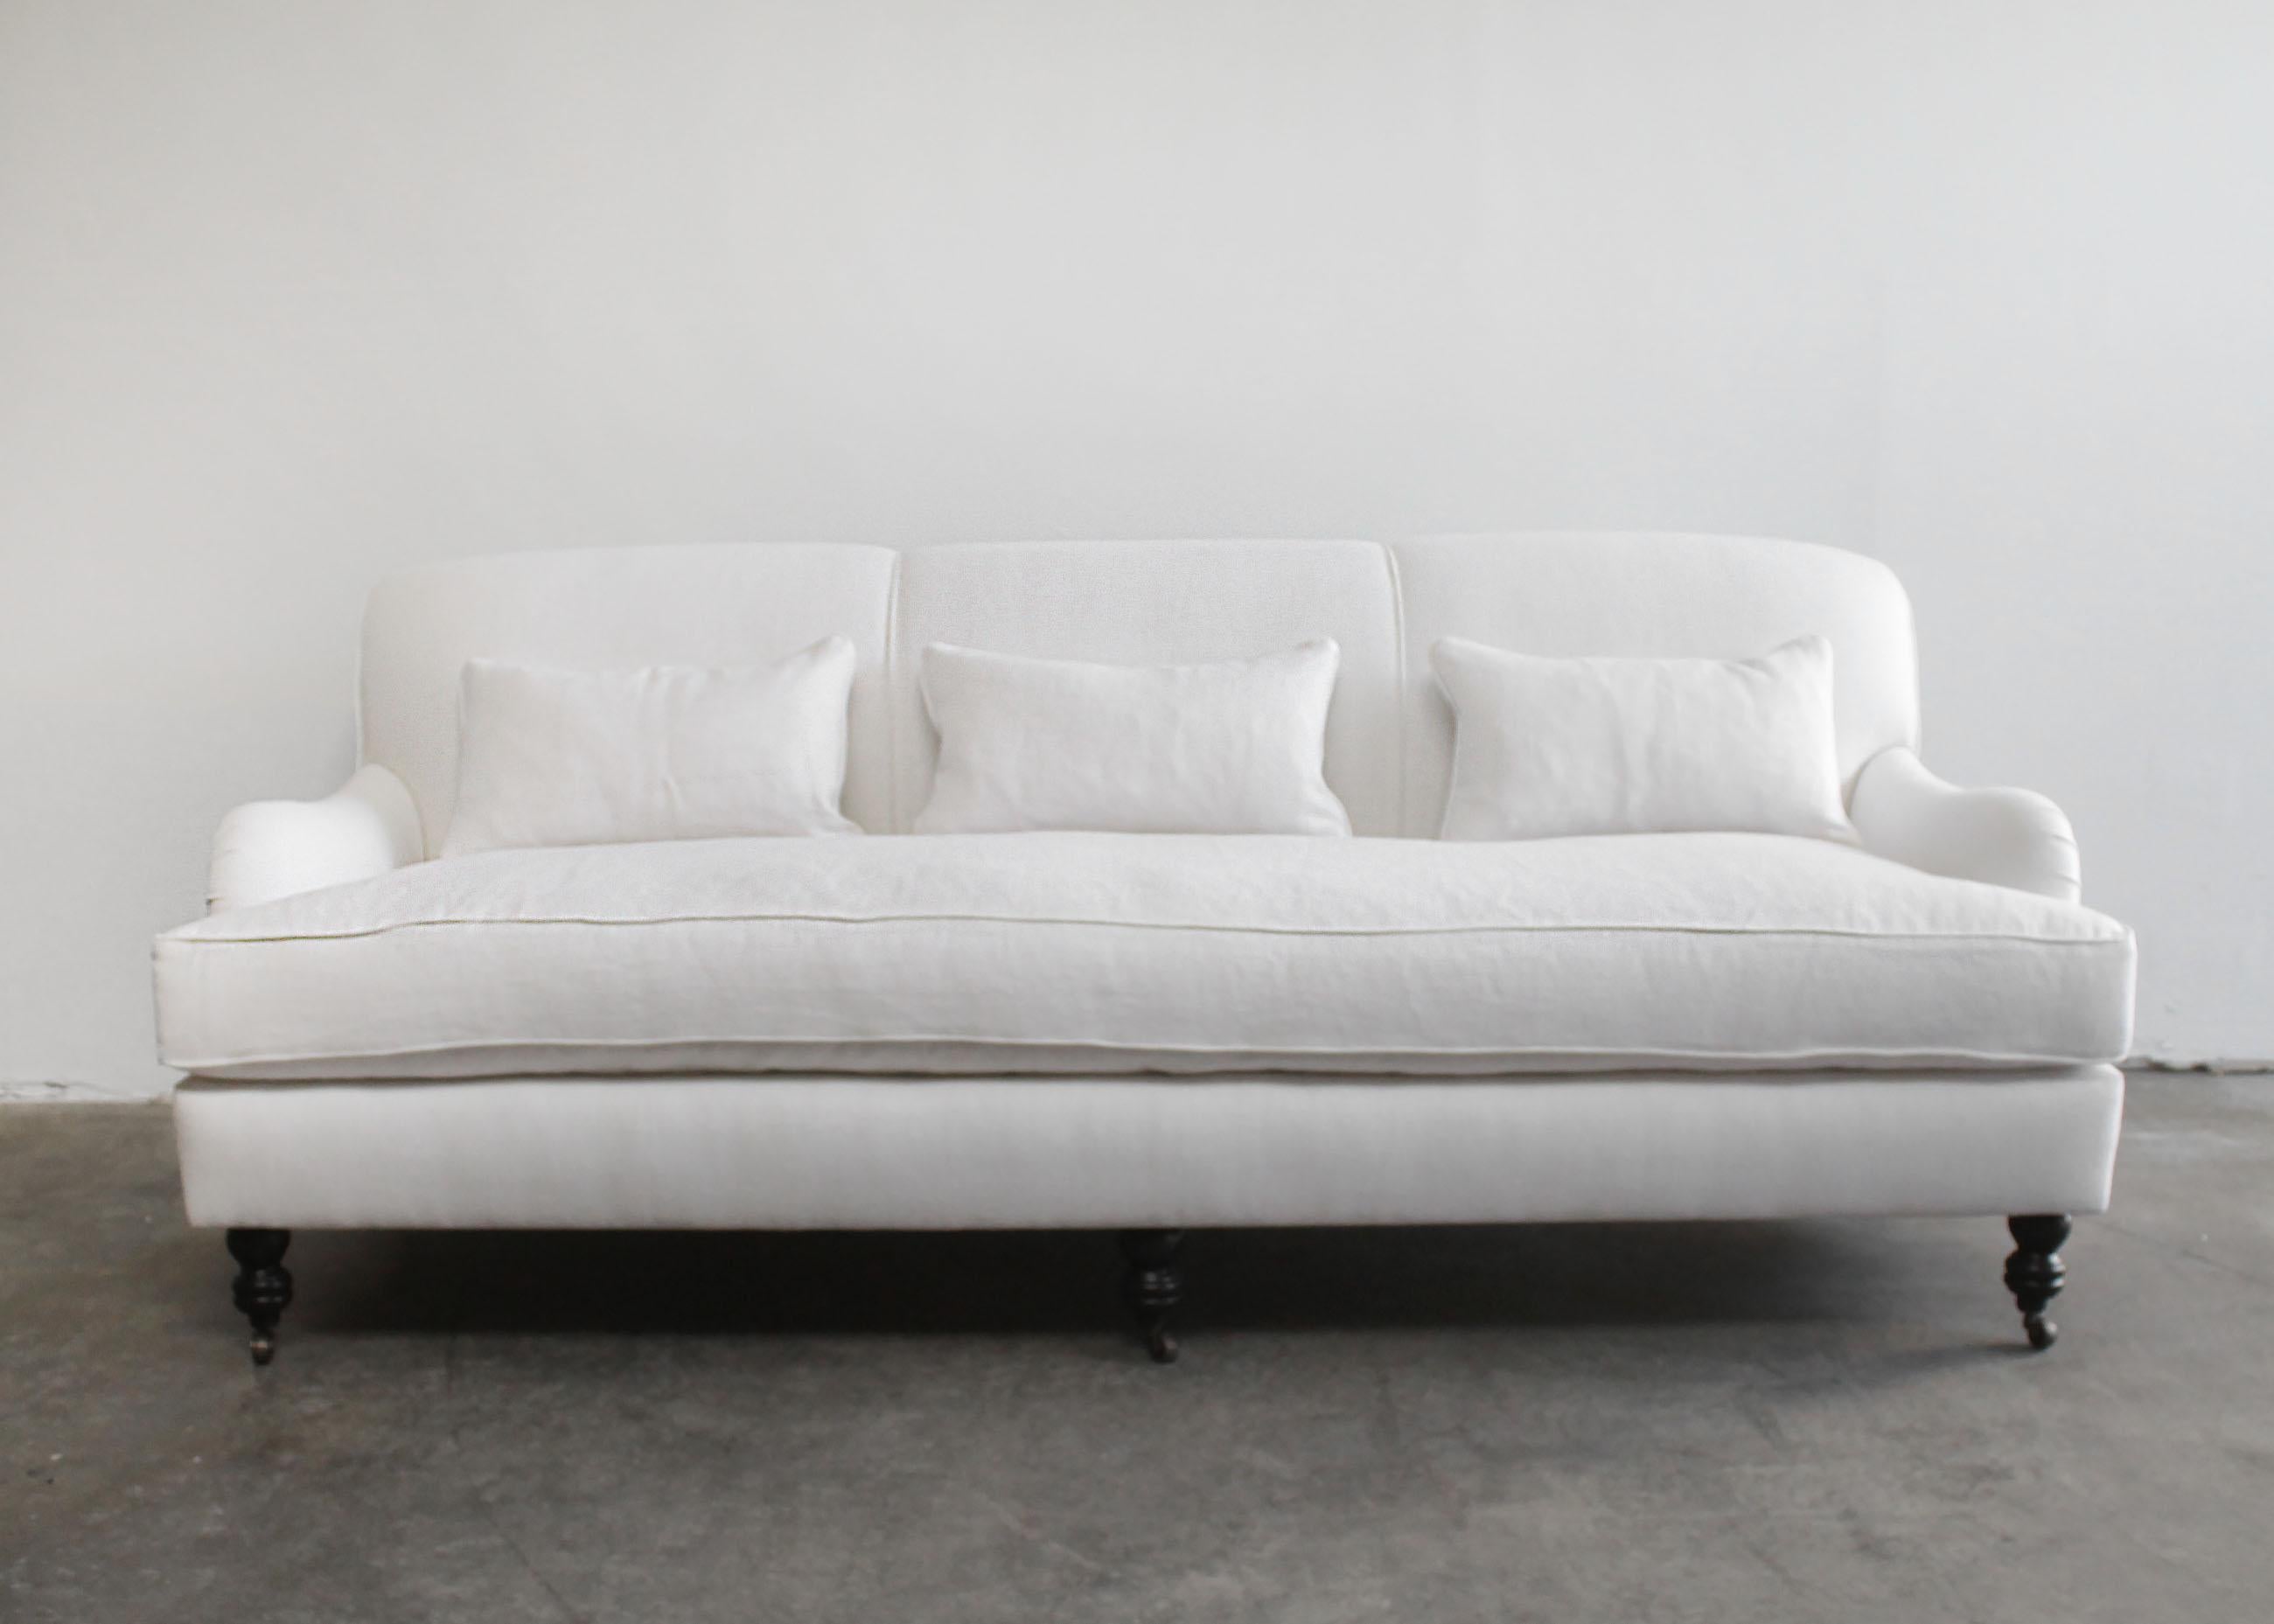 White linen English arm rolled back sofa with casters + REUPHOLSTERY IN LIBECO NATURAL LINEN ($1728)_ +LABOR ($2250)
FLOOR MODEL
Custom made to order, upholstered in a heavy weight Belgian linen, with down feather seats.
Very comfortable to sit in,